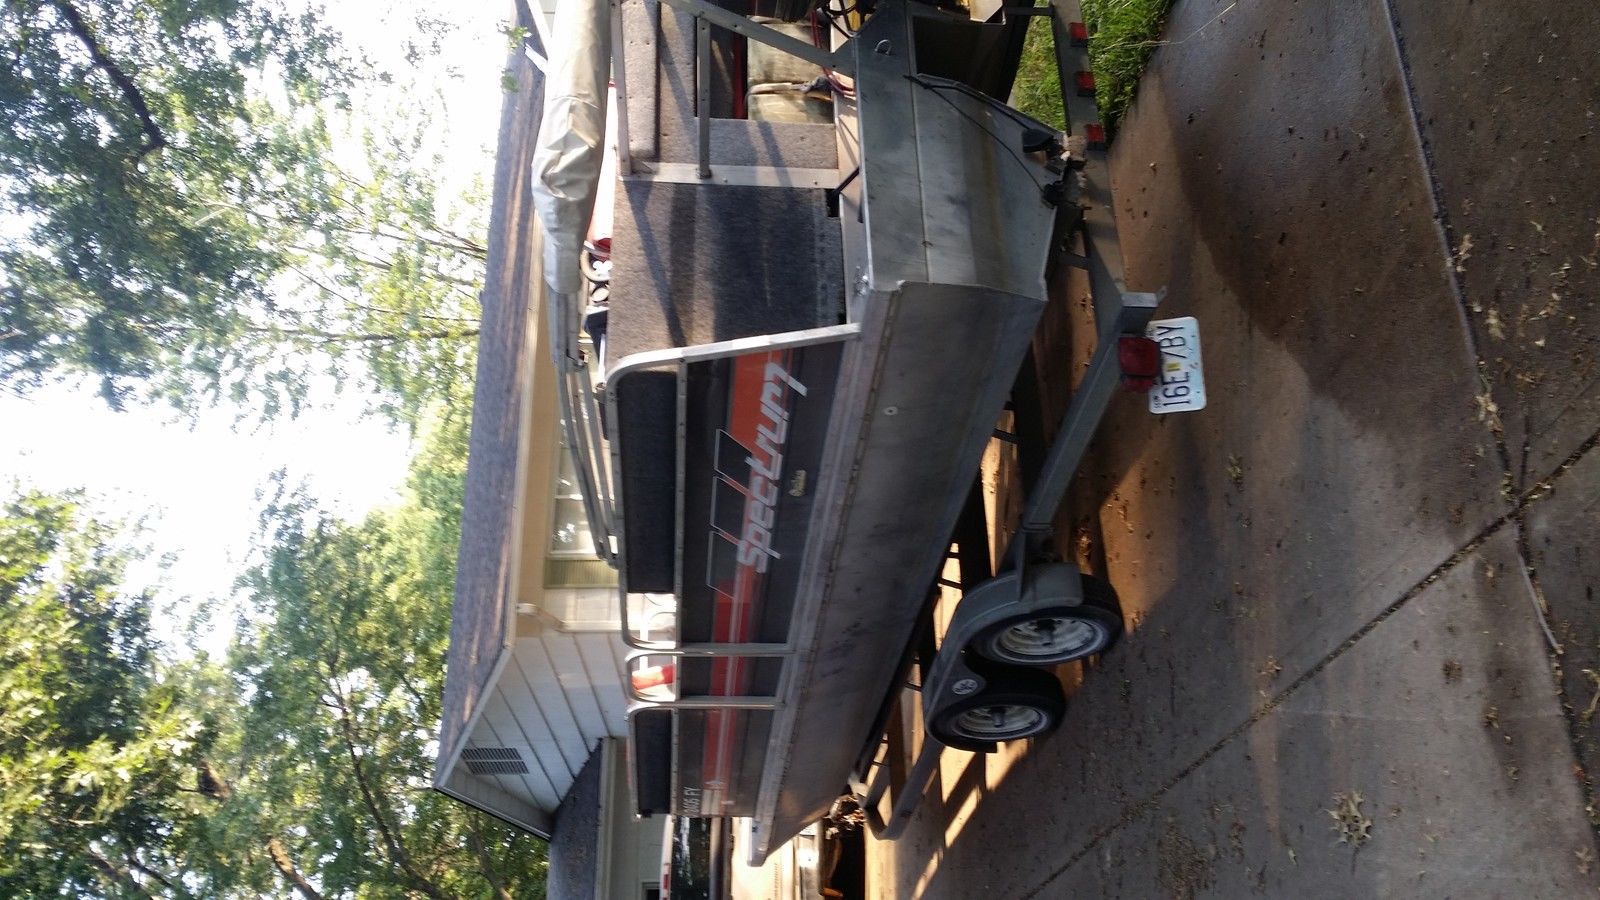 Blue Fin Spectrum 1990 for sale for $1,500 - Boats-from ...